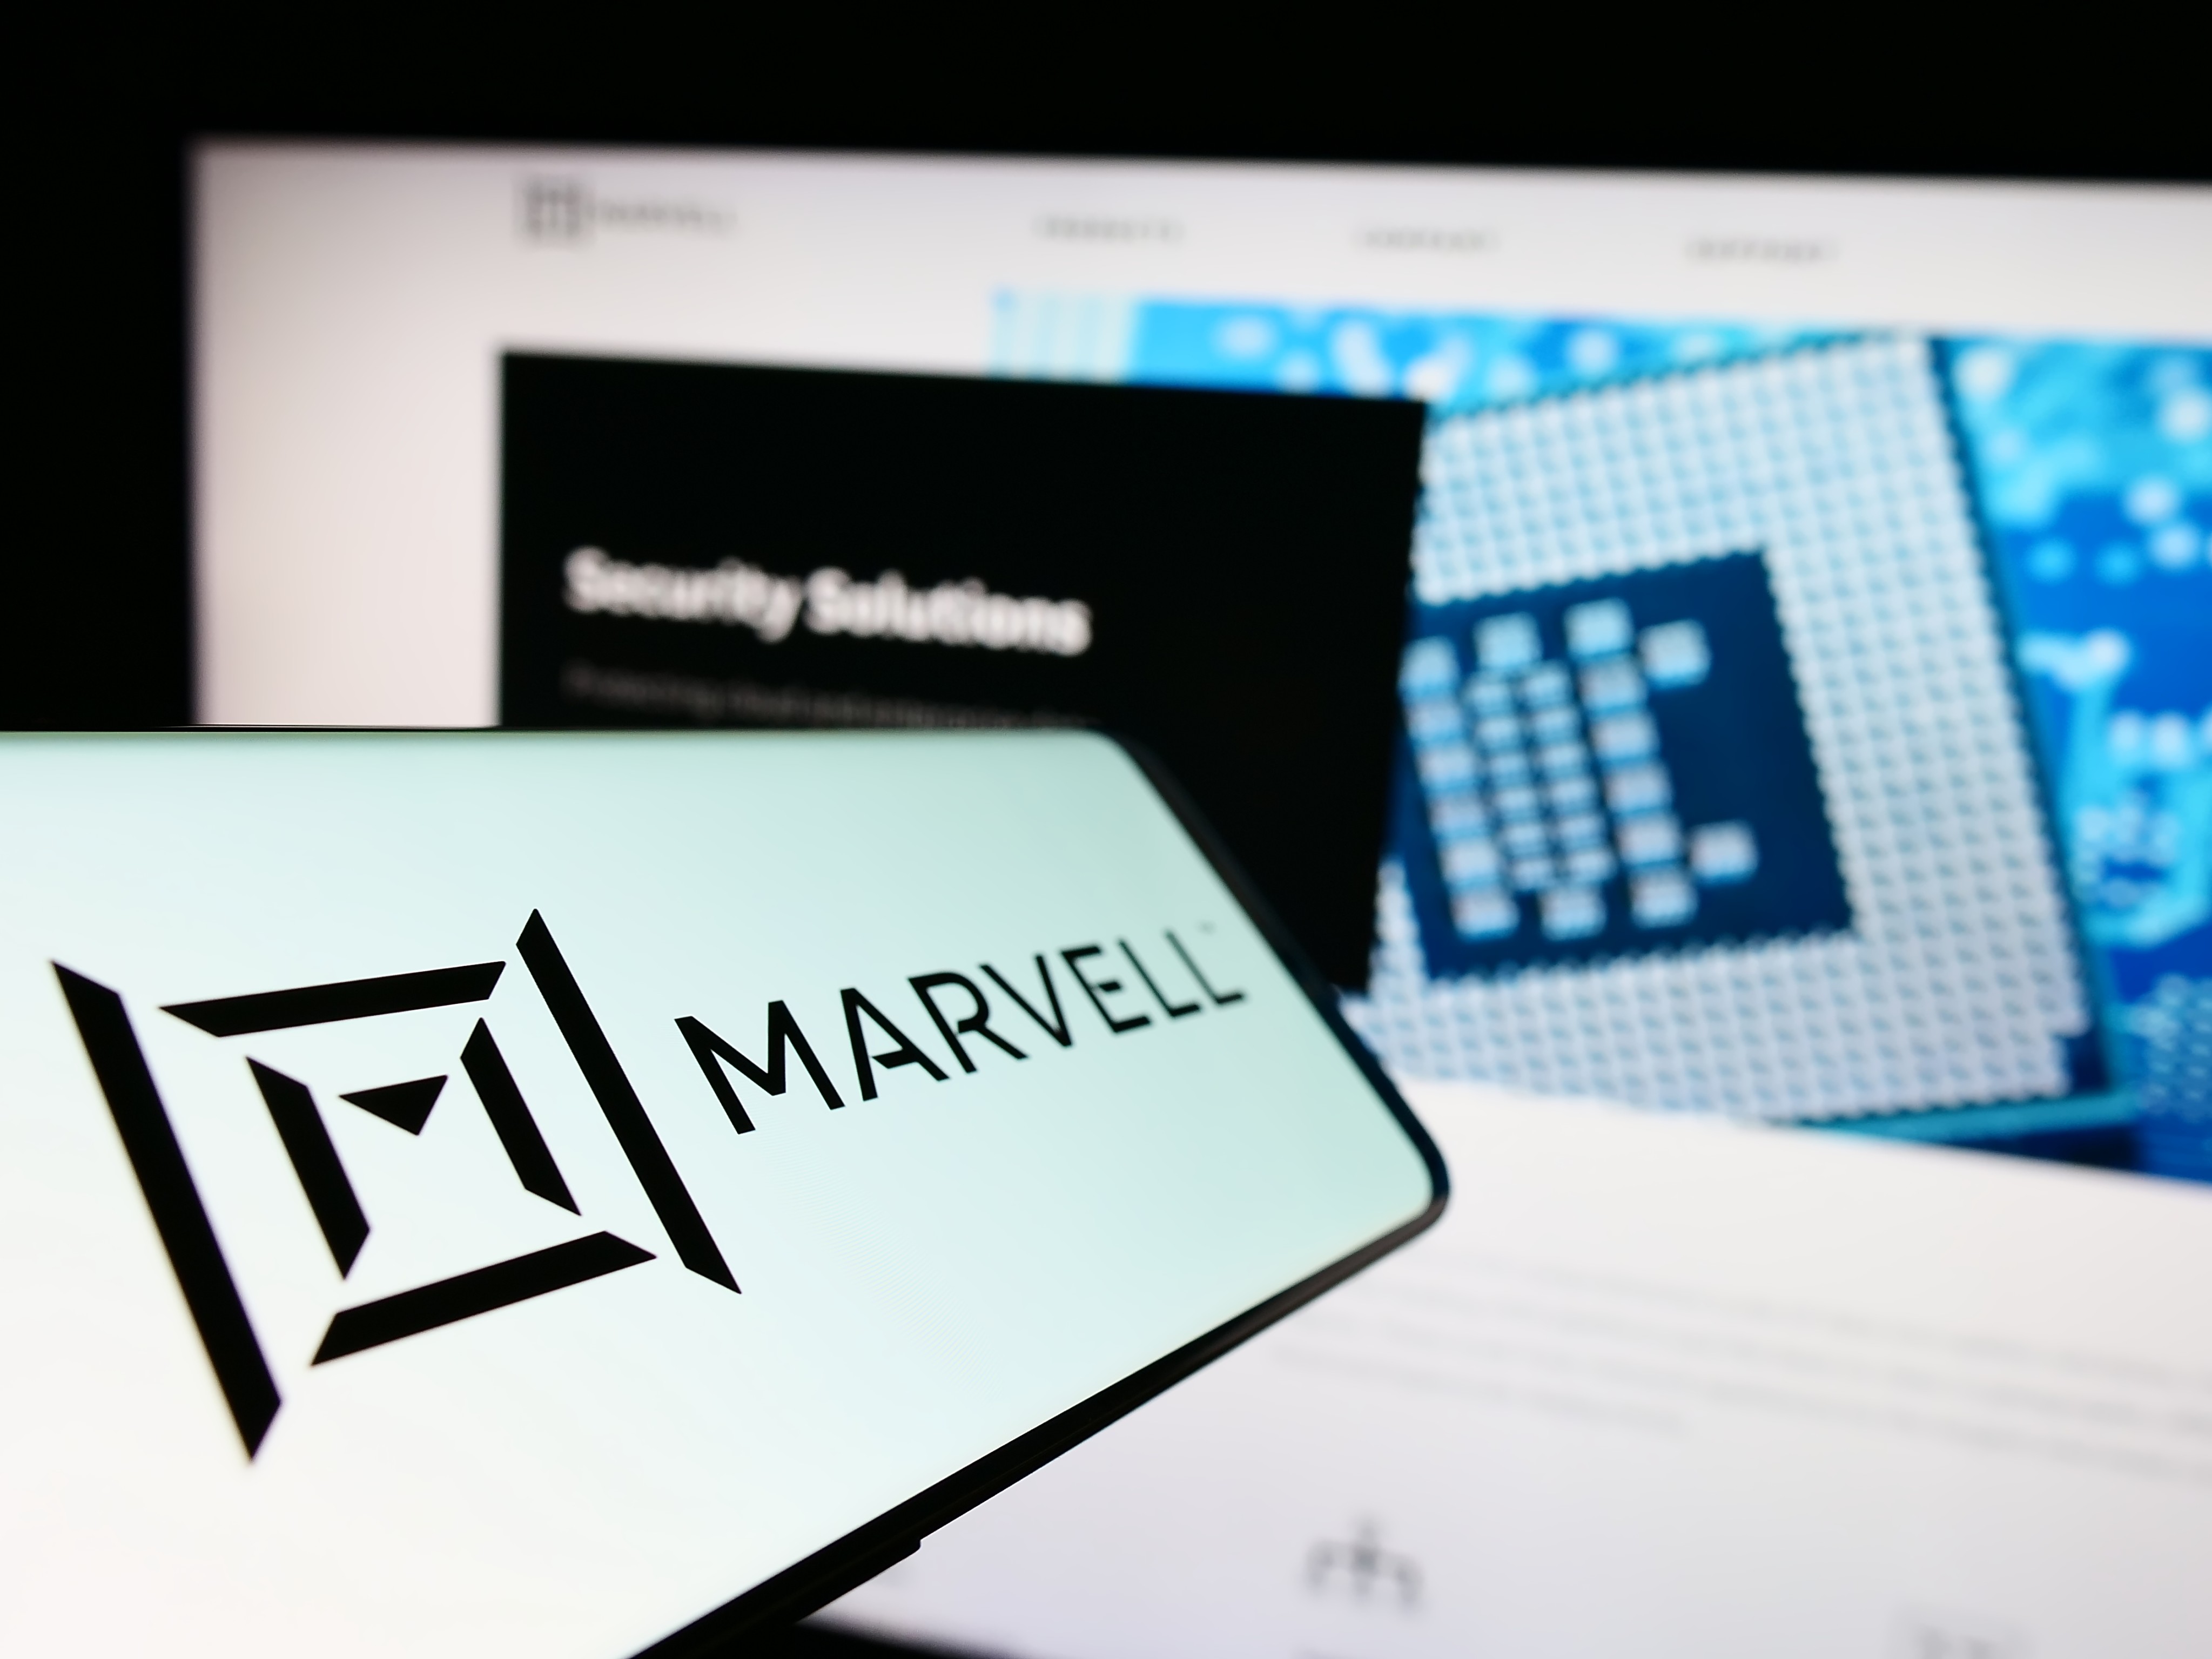 While China remains a large and important market, Marvell Technology said its latest job cuts will eliminate its research and development roles on the mainland. Photo: Shutterstock